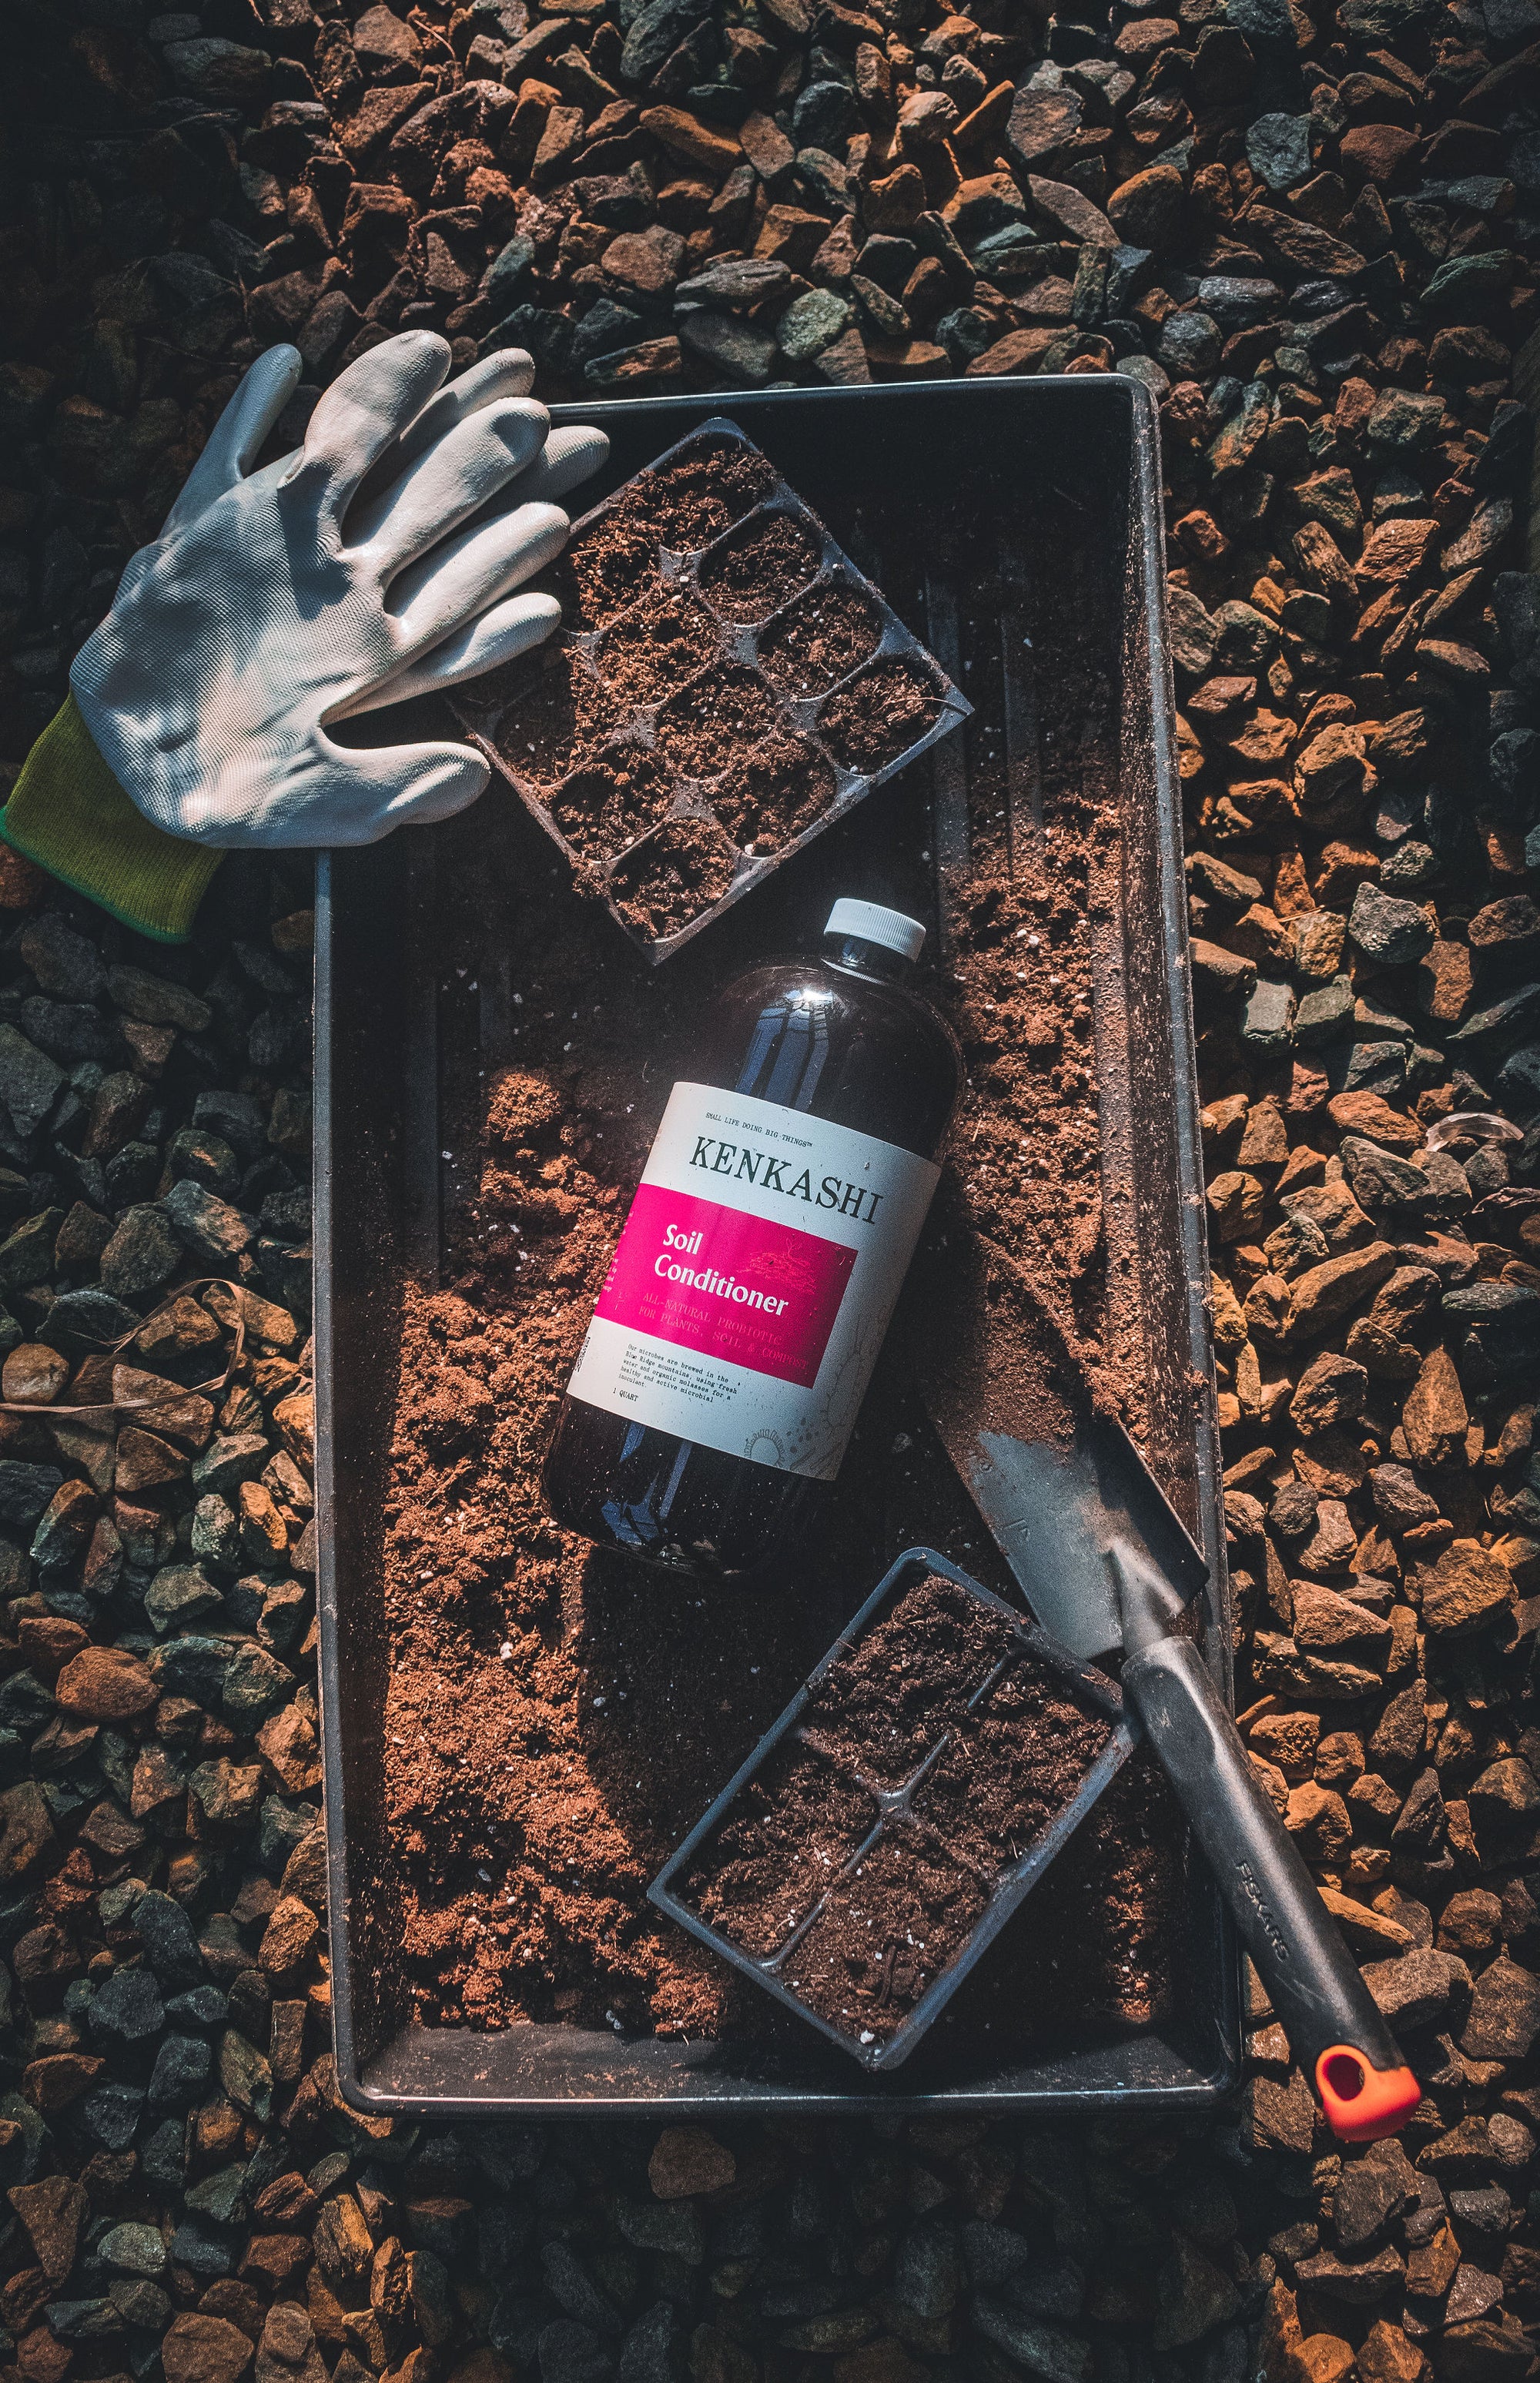 Bottle of Kenkashi soil conditioner liquid inoculated microbial concentrate on a tray of seed starter soil shovel and gloves 